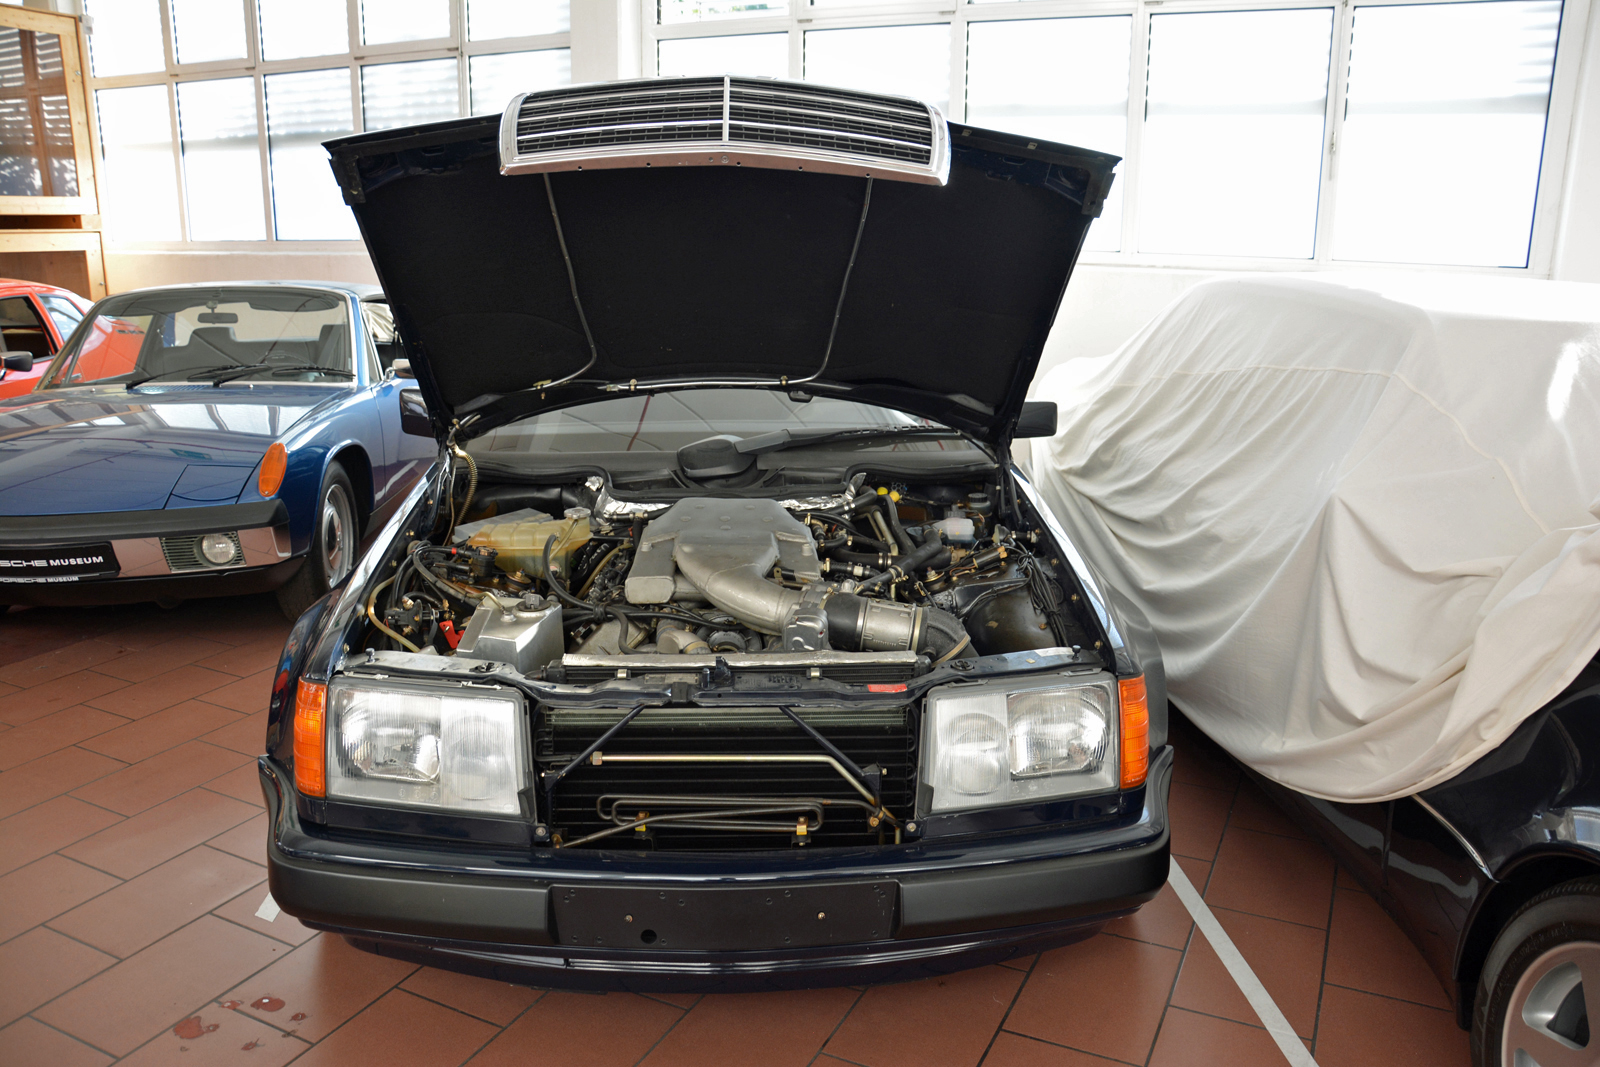 <p>Engineers tested the 989’s 4.2-liter V8 engine in real-world conditions by installing it under the hood of a <strong>Mercedes-Benz W124 E-Class</strong>. Period document note the W124 was chosen because it was close to the 989 in terms of size, weight, and performance. Never series-produced, the water-cooled V8 was also seriously considered as a replacement for the 911’s air-cooled flat-six.</p>